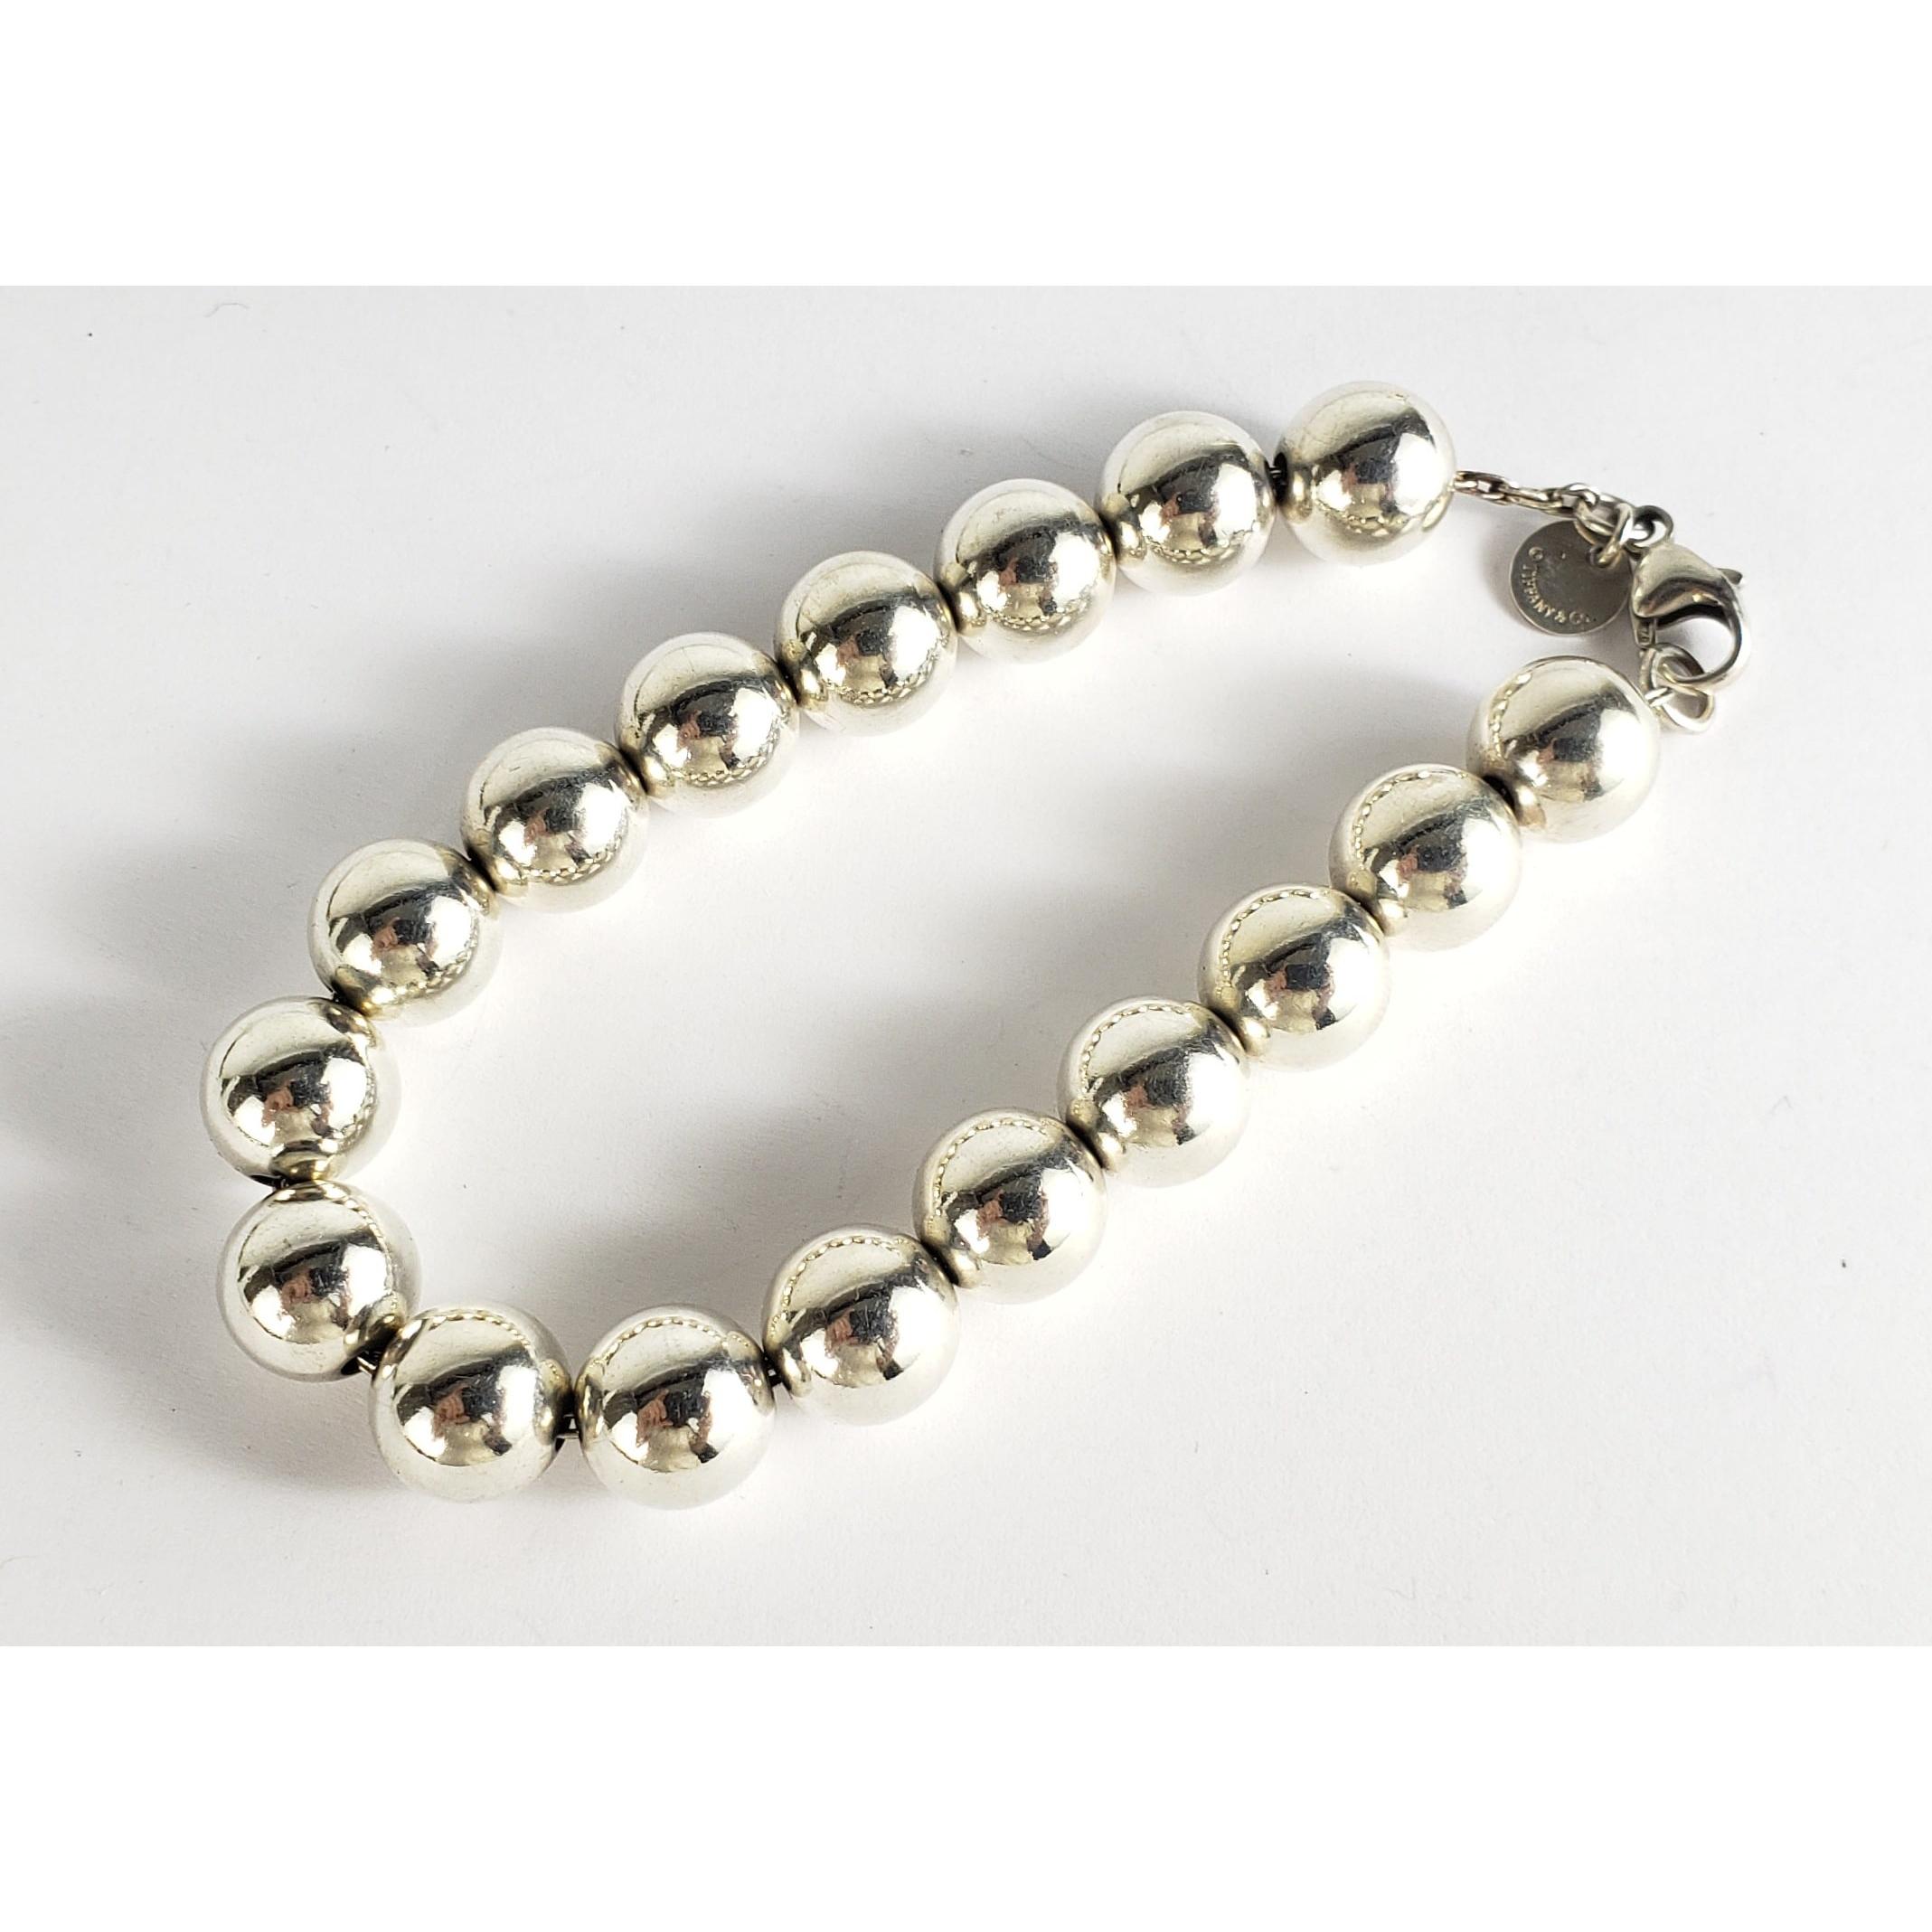 Bead bracelet in sterling silver, 7.5 long and 10 mm.